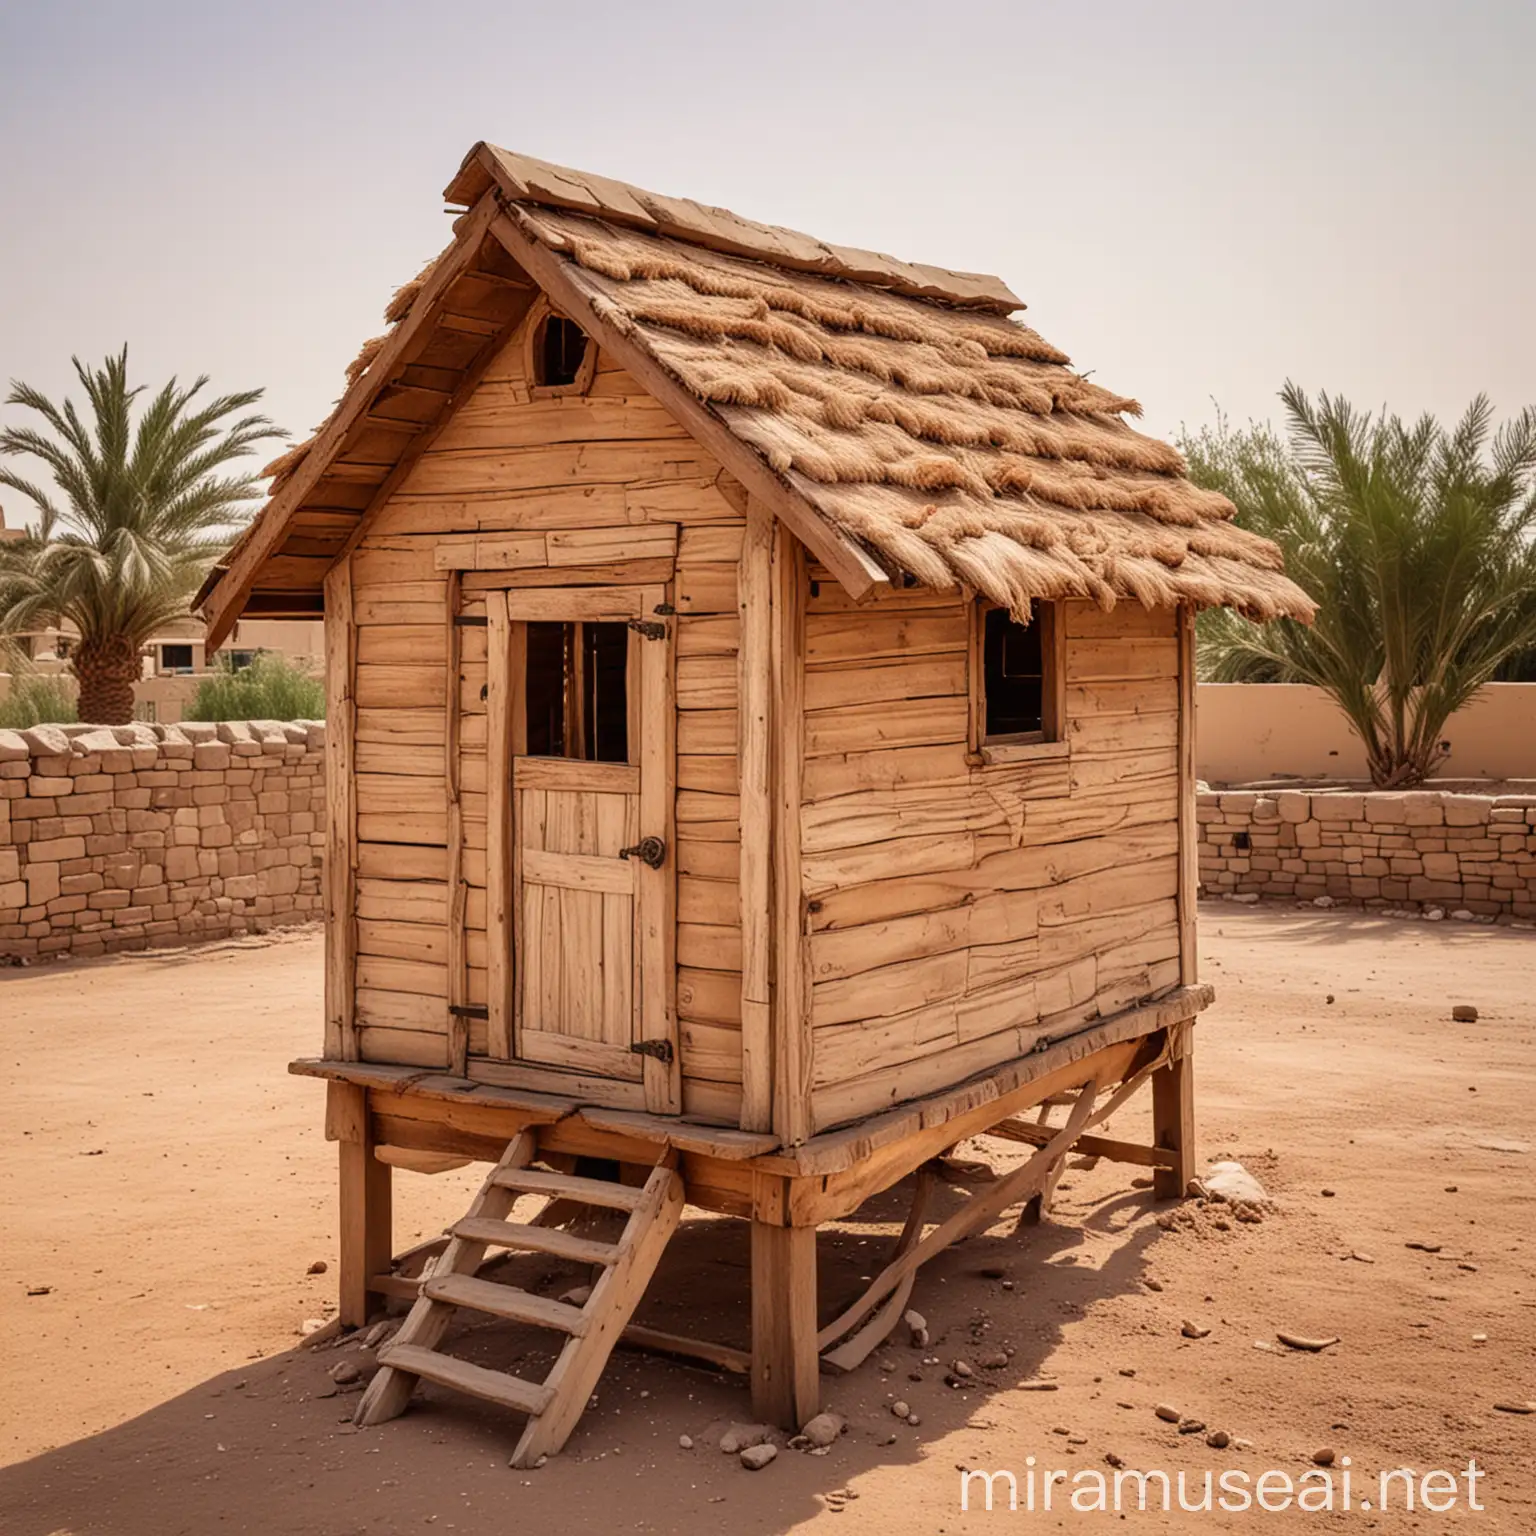 A picture of a chicken coop made of wood on the roof of the Egyptian house and the picture is a real photograph